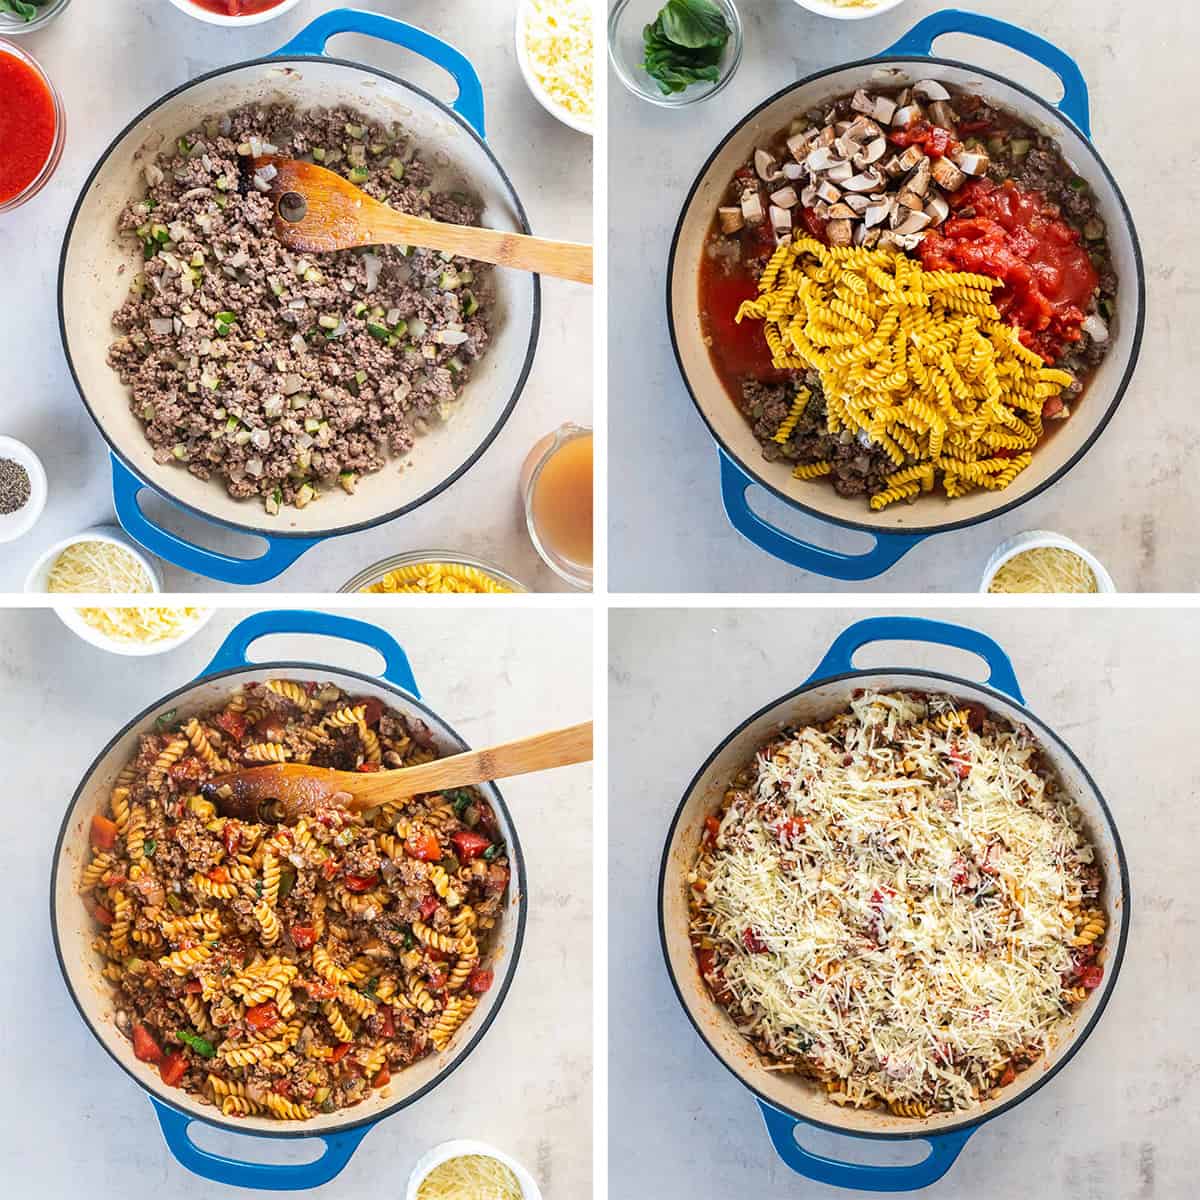 Four images of ground beef, vegetables, pasta, tomatoes, and cheese cooking together in a skillet.